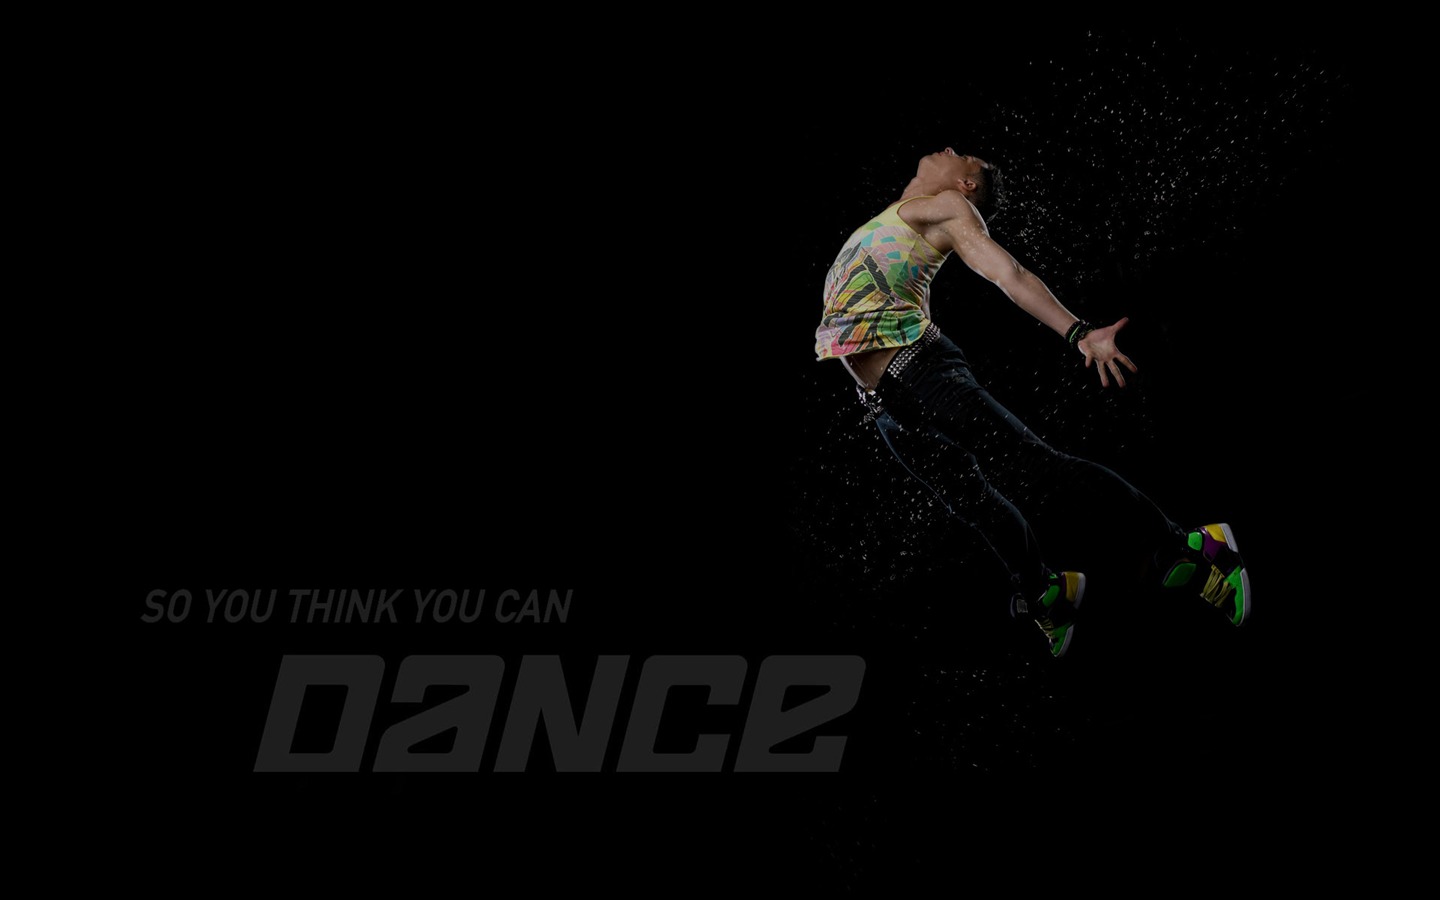 So You Think You Can Dance 舞林争霸 壁纸(二)6 - 1440x900